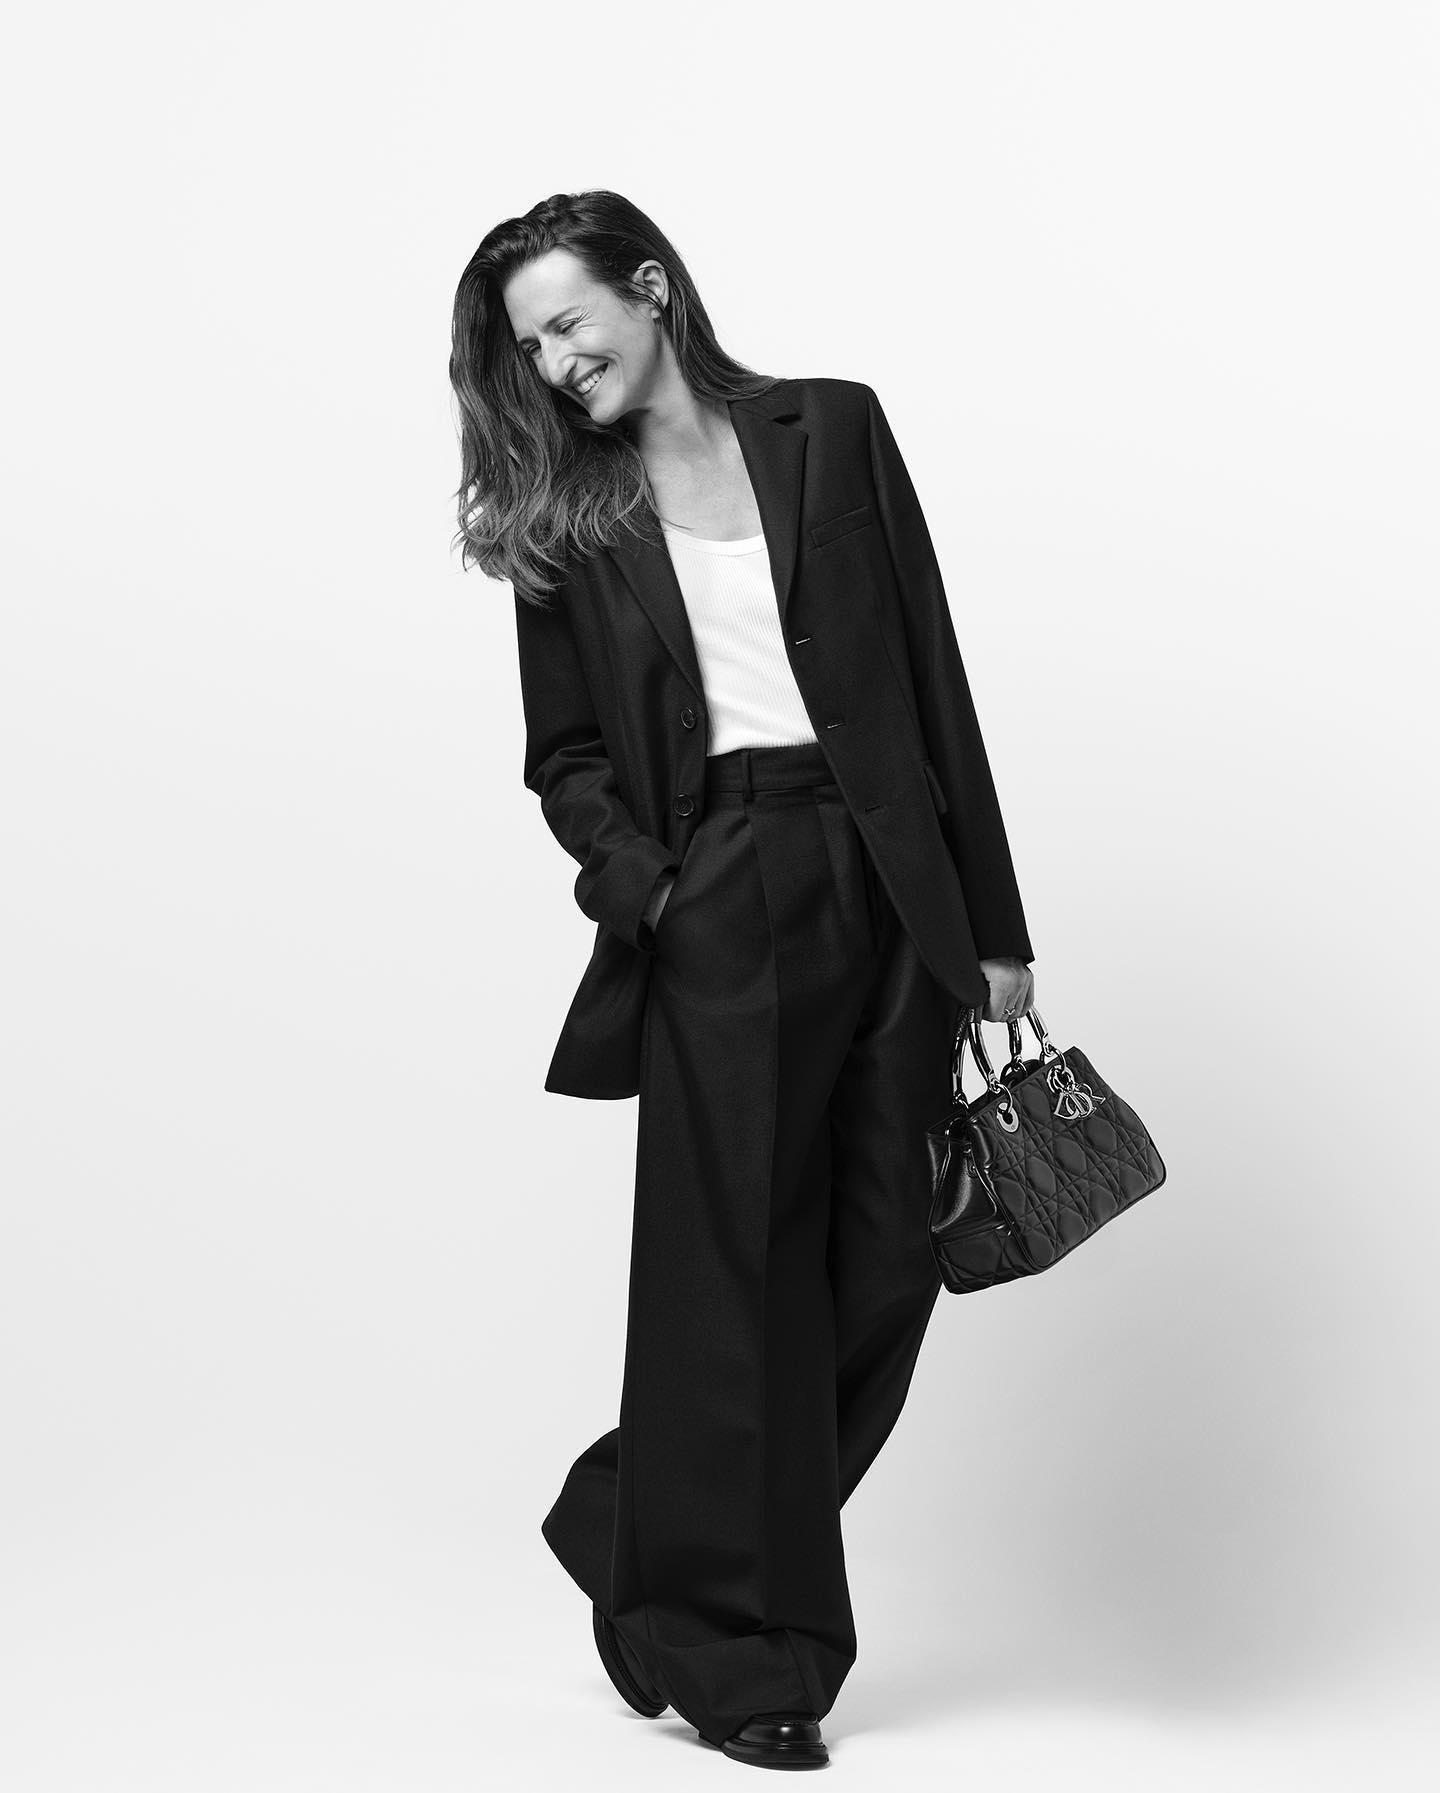 image  1 Carried by Camille Cottin, this Medium #DiorLady9522 in black is one of three sizes and two colors o